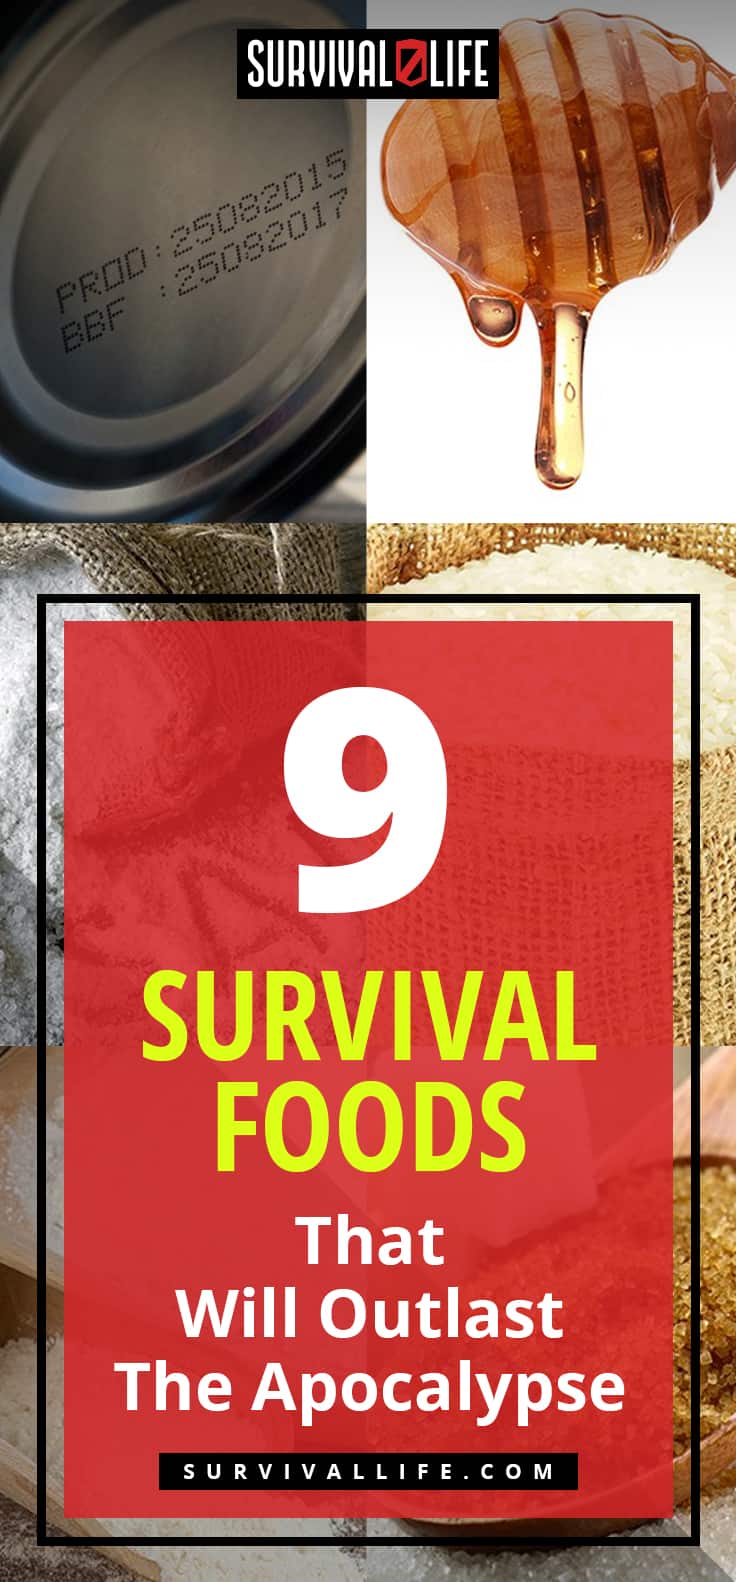 Check out 9 Survival Foods That Will Outlast The Apocalypse at https://survivallife.com/survival-food-outlast-apocalypse/